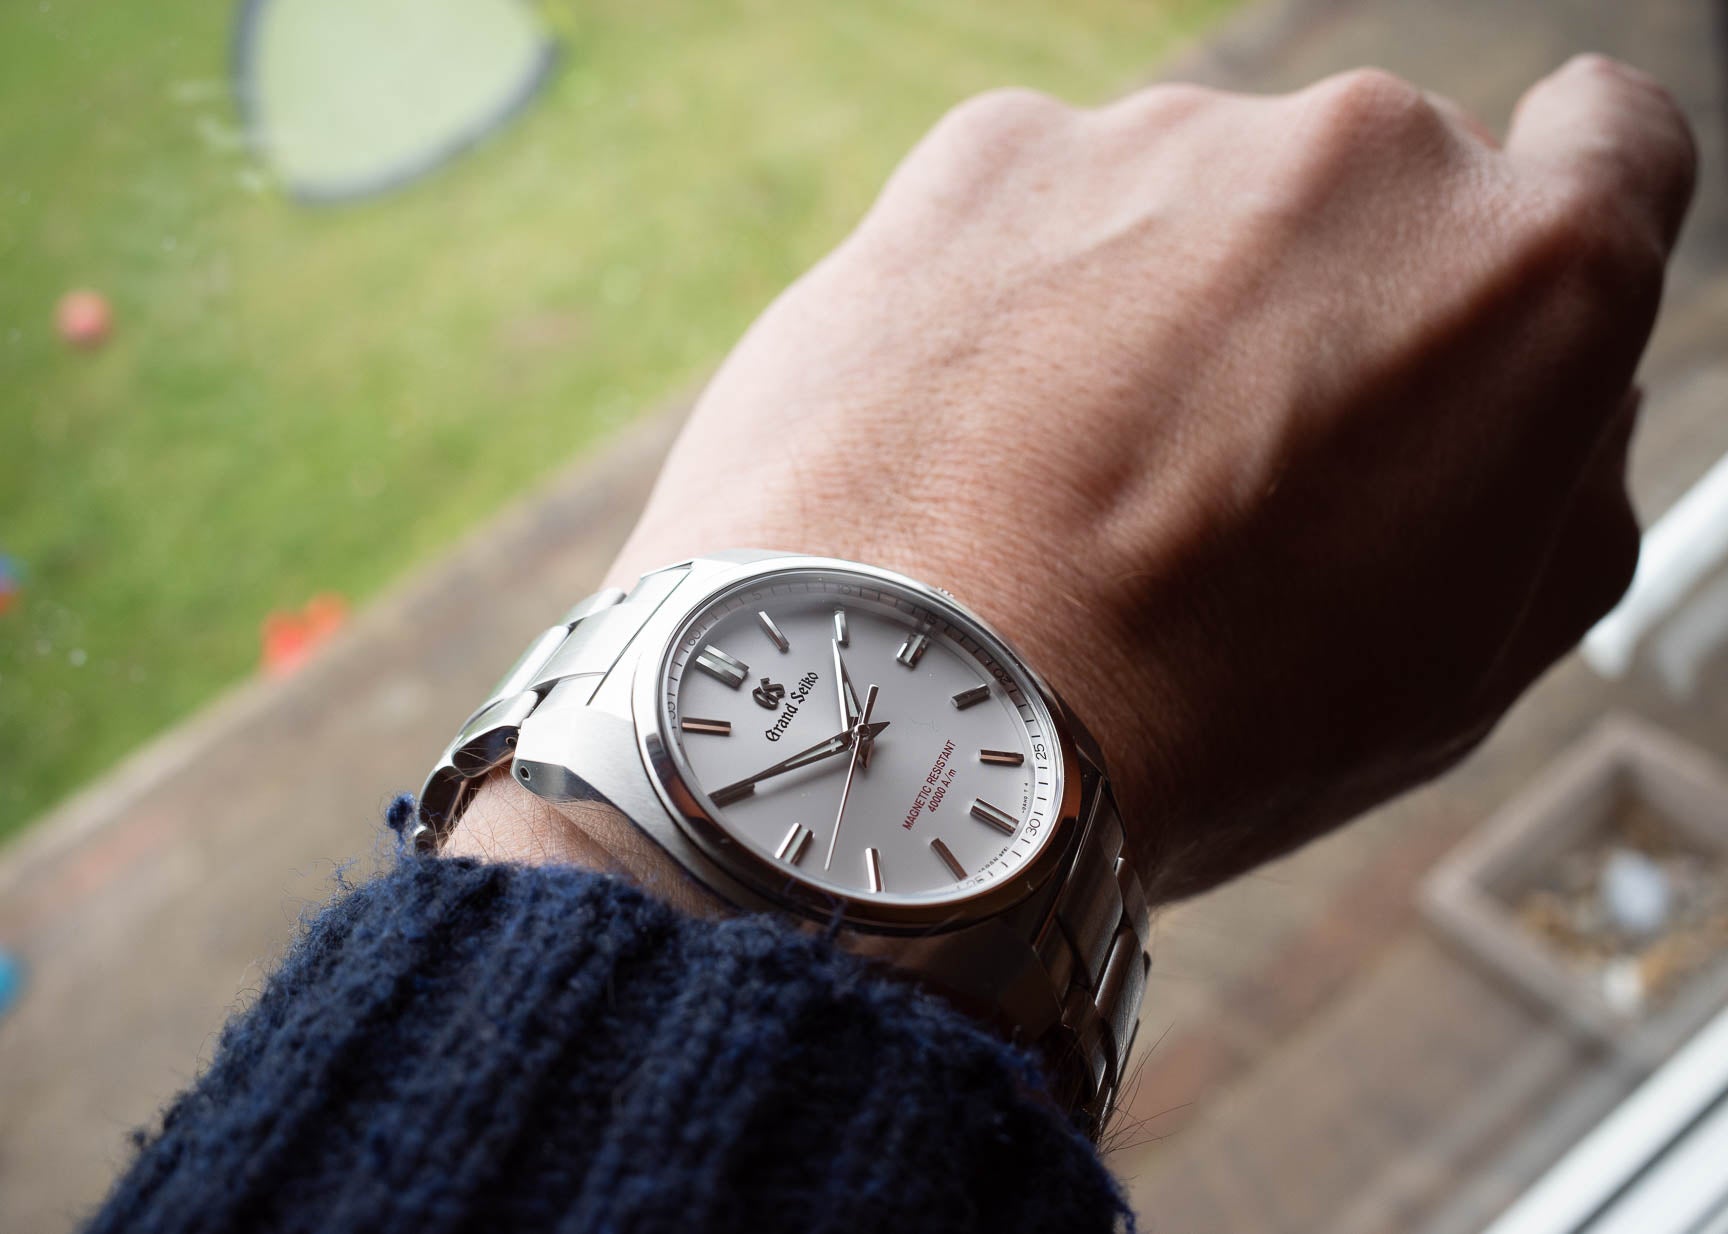 Grand Seiko investment? | Page 2 | WatchUSeek Watch Forums